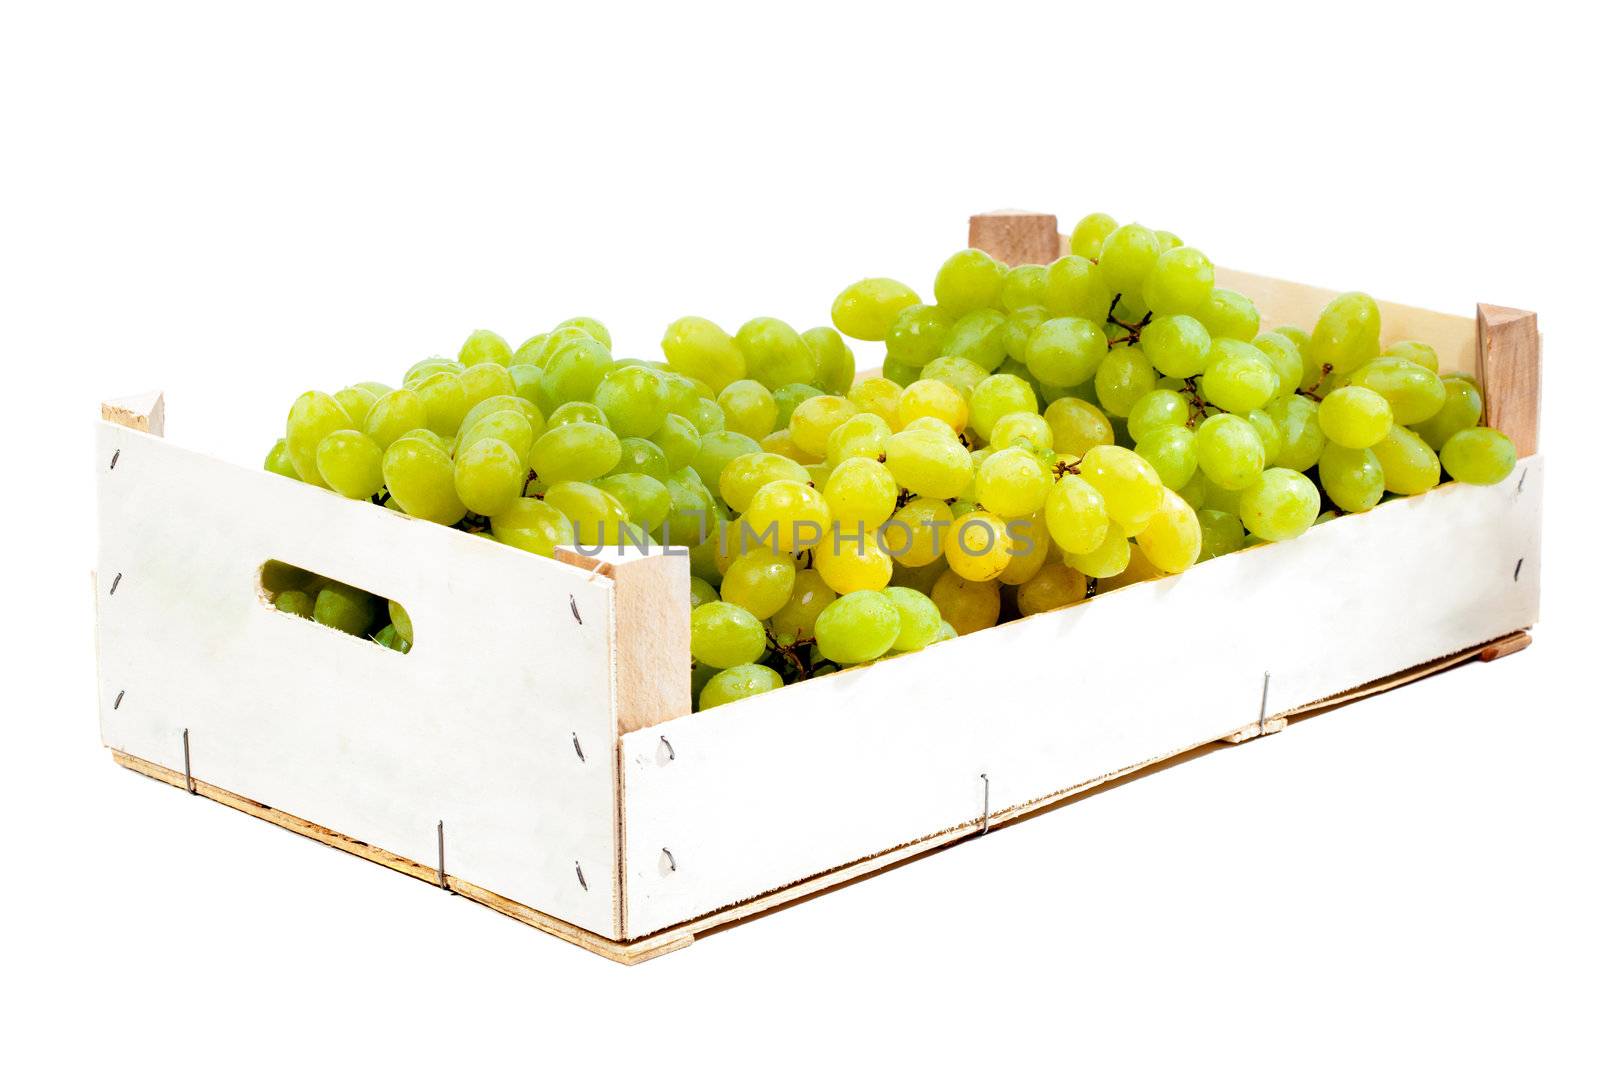 Ripe green grapes in a wooden crate box isolated